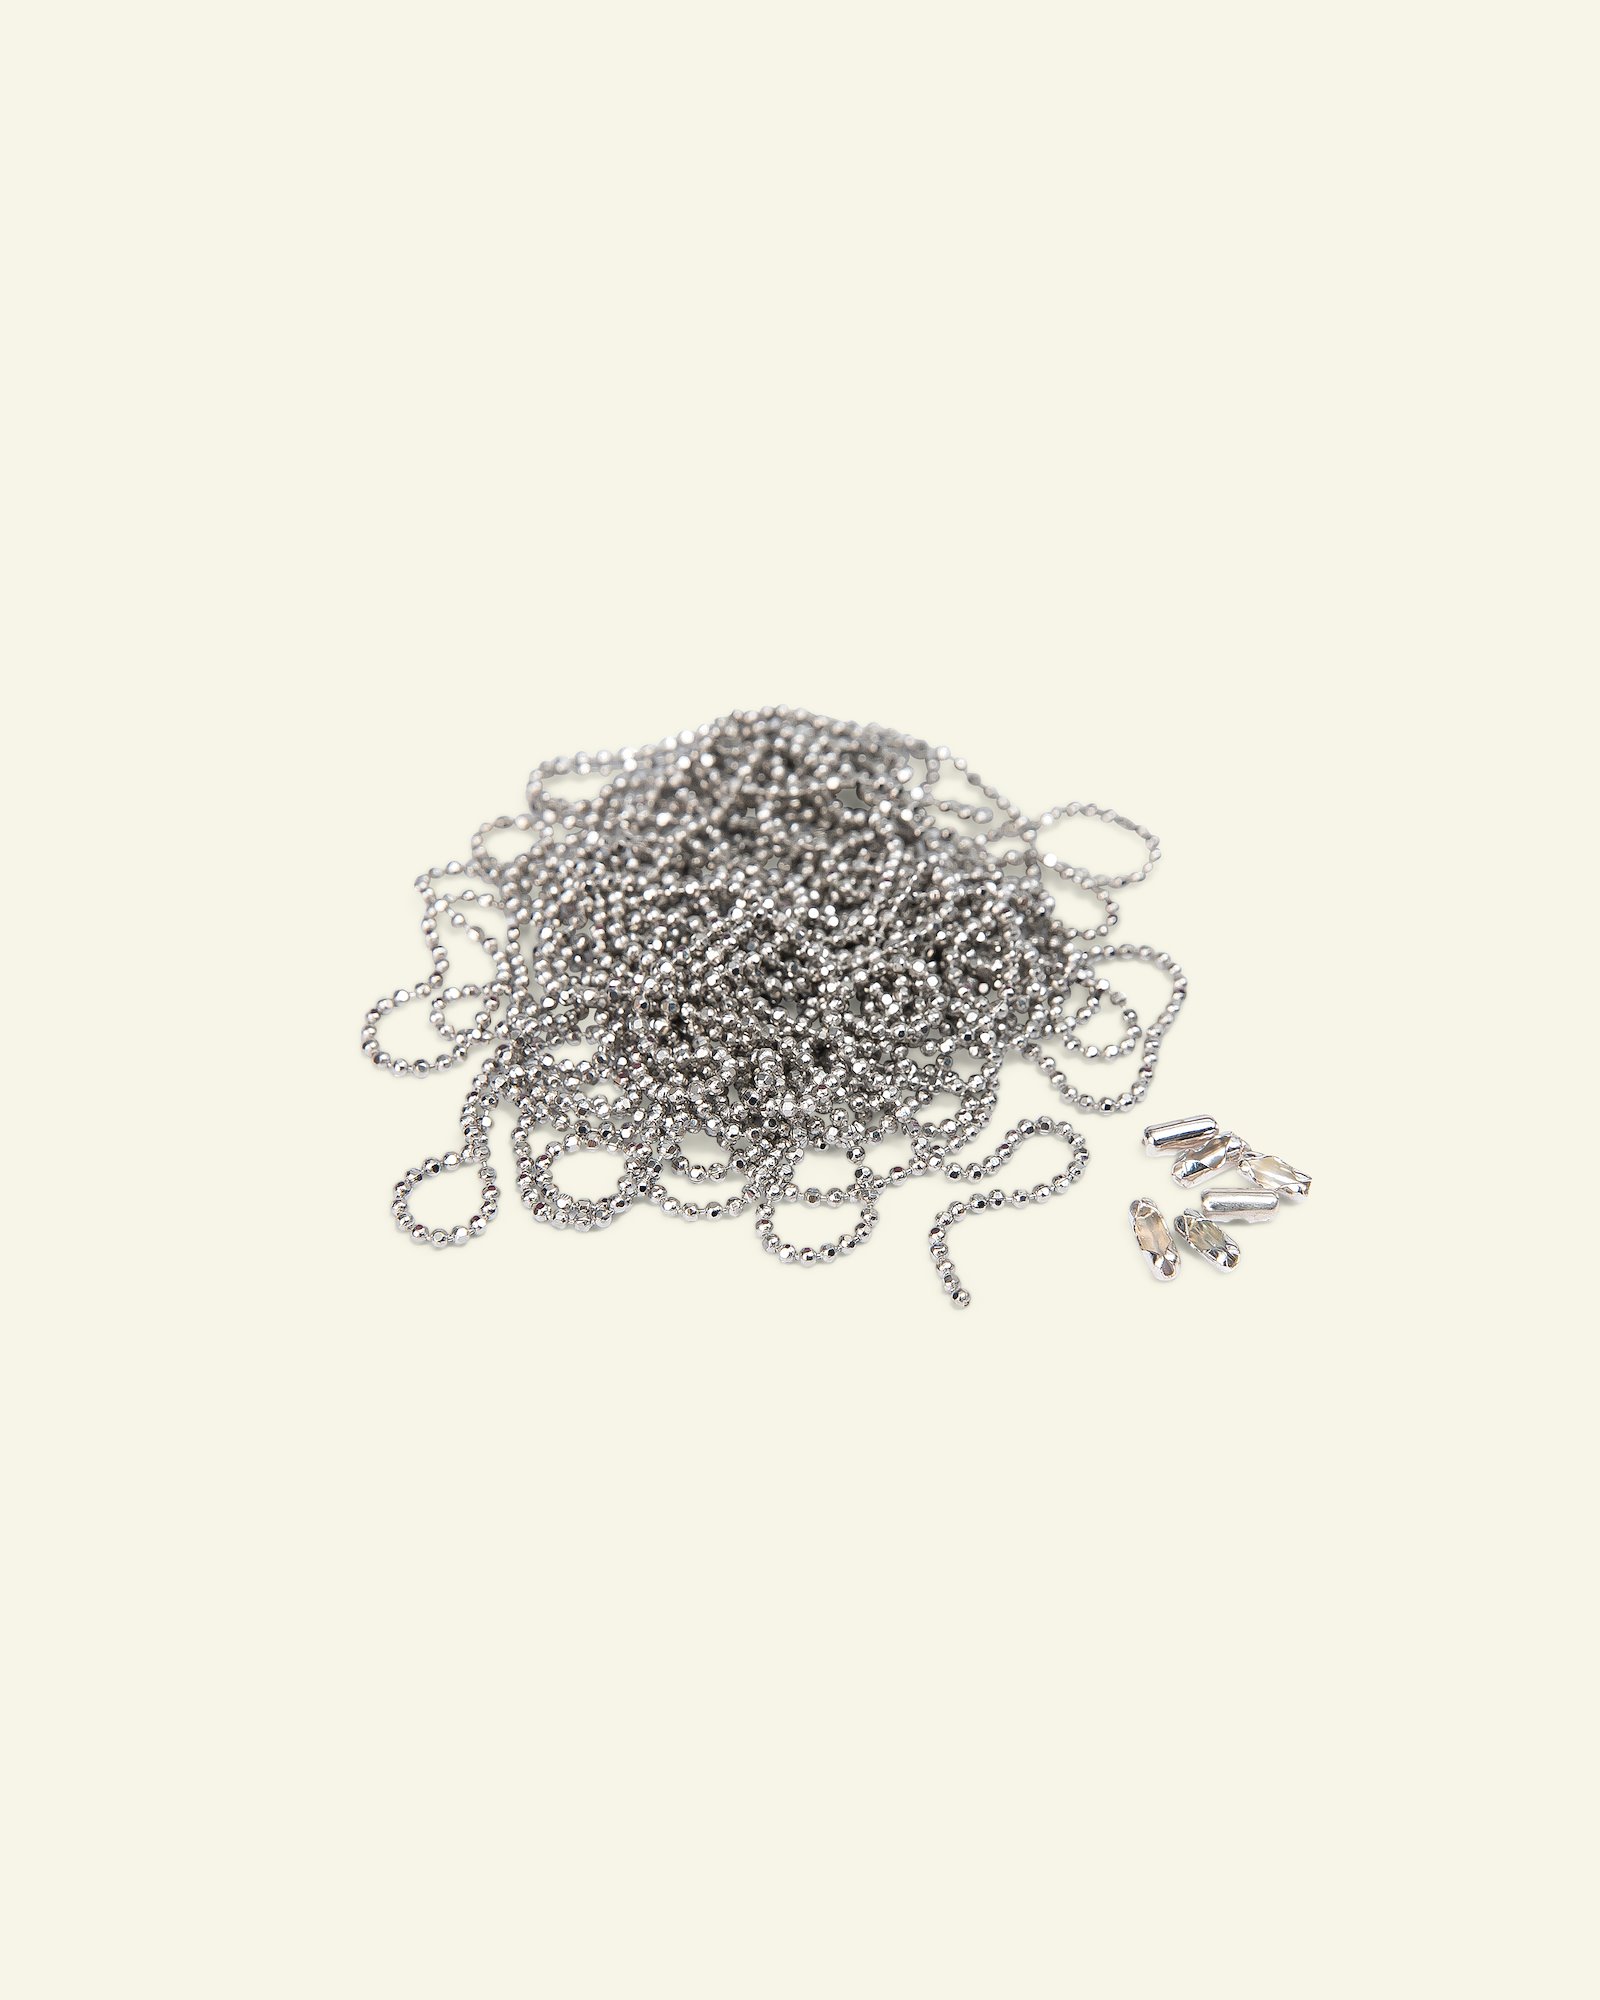 Ball chain w/6 lock 1mm silver colored 45389_pack